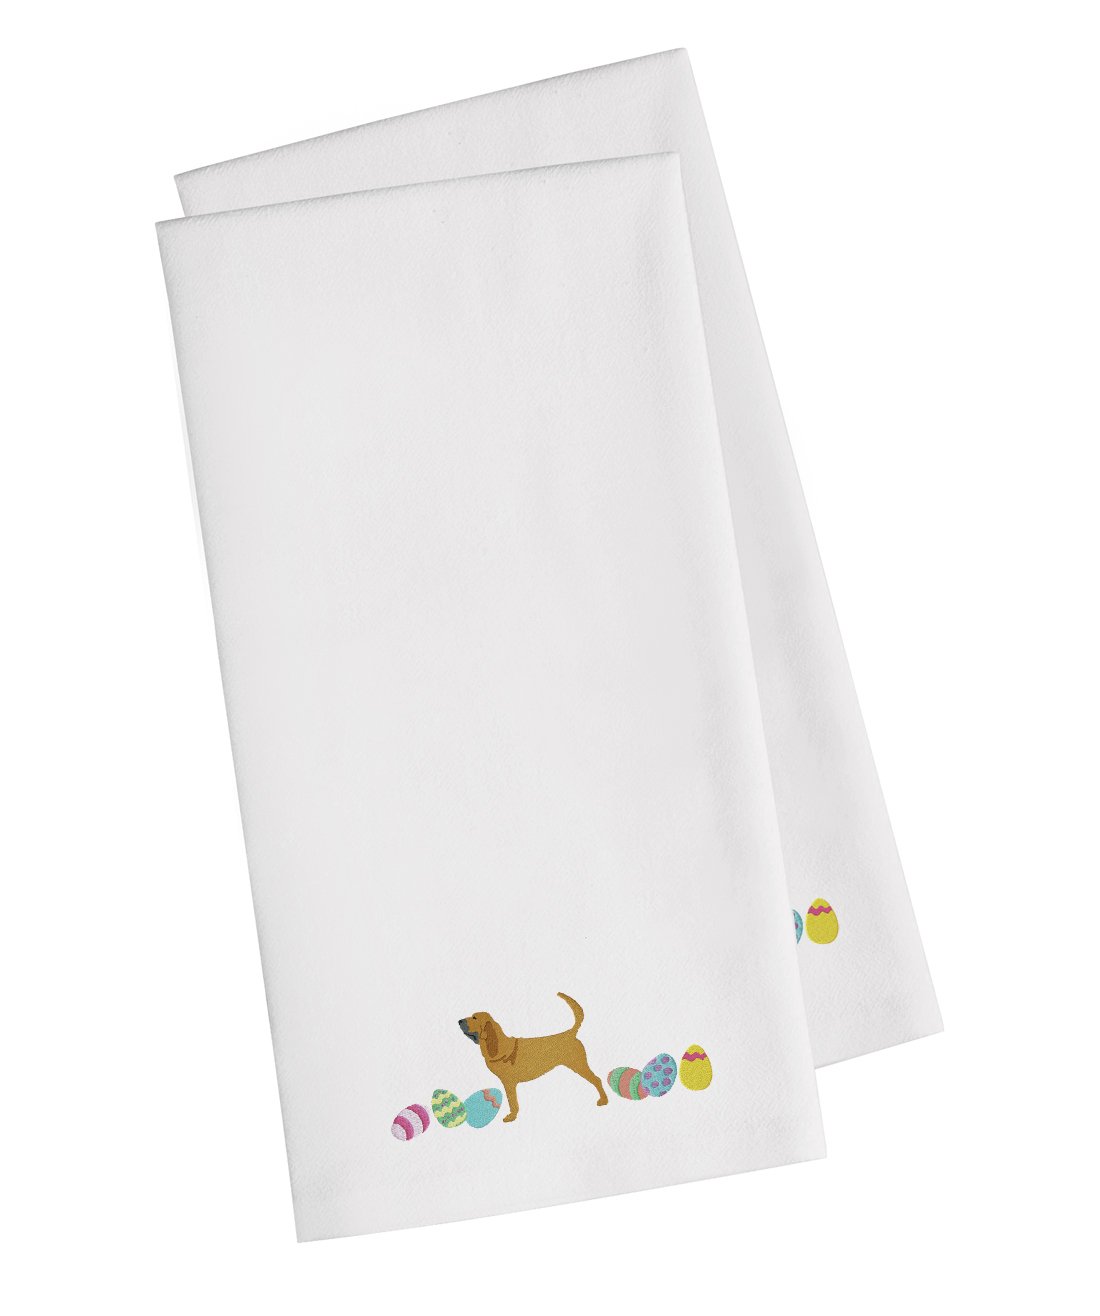 Bloodhound Easter White Embroidered Kitchen Towel Set of 2 CK1612WHTWE by Caroline's Treasures